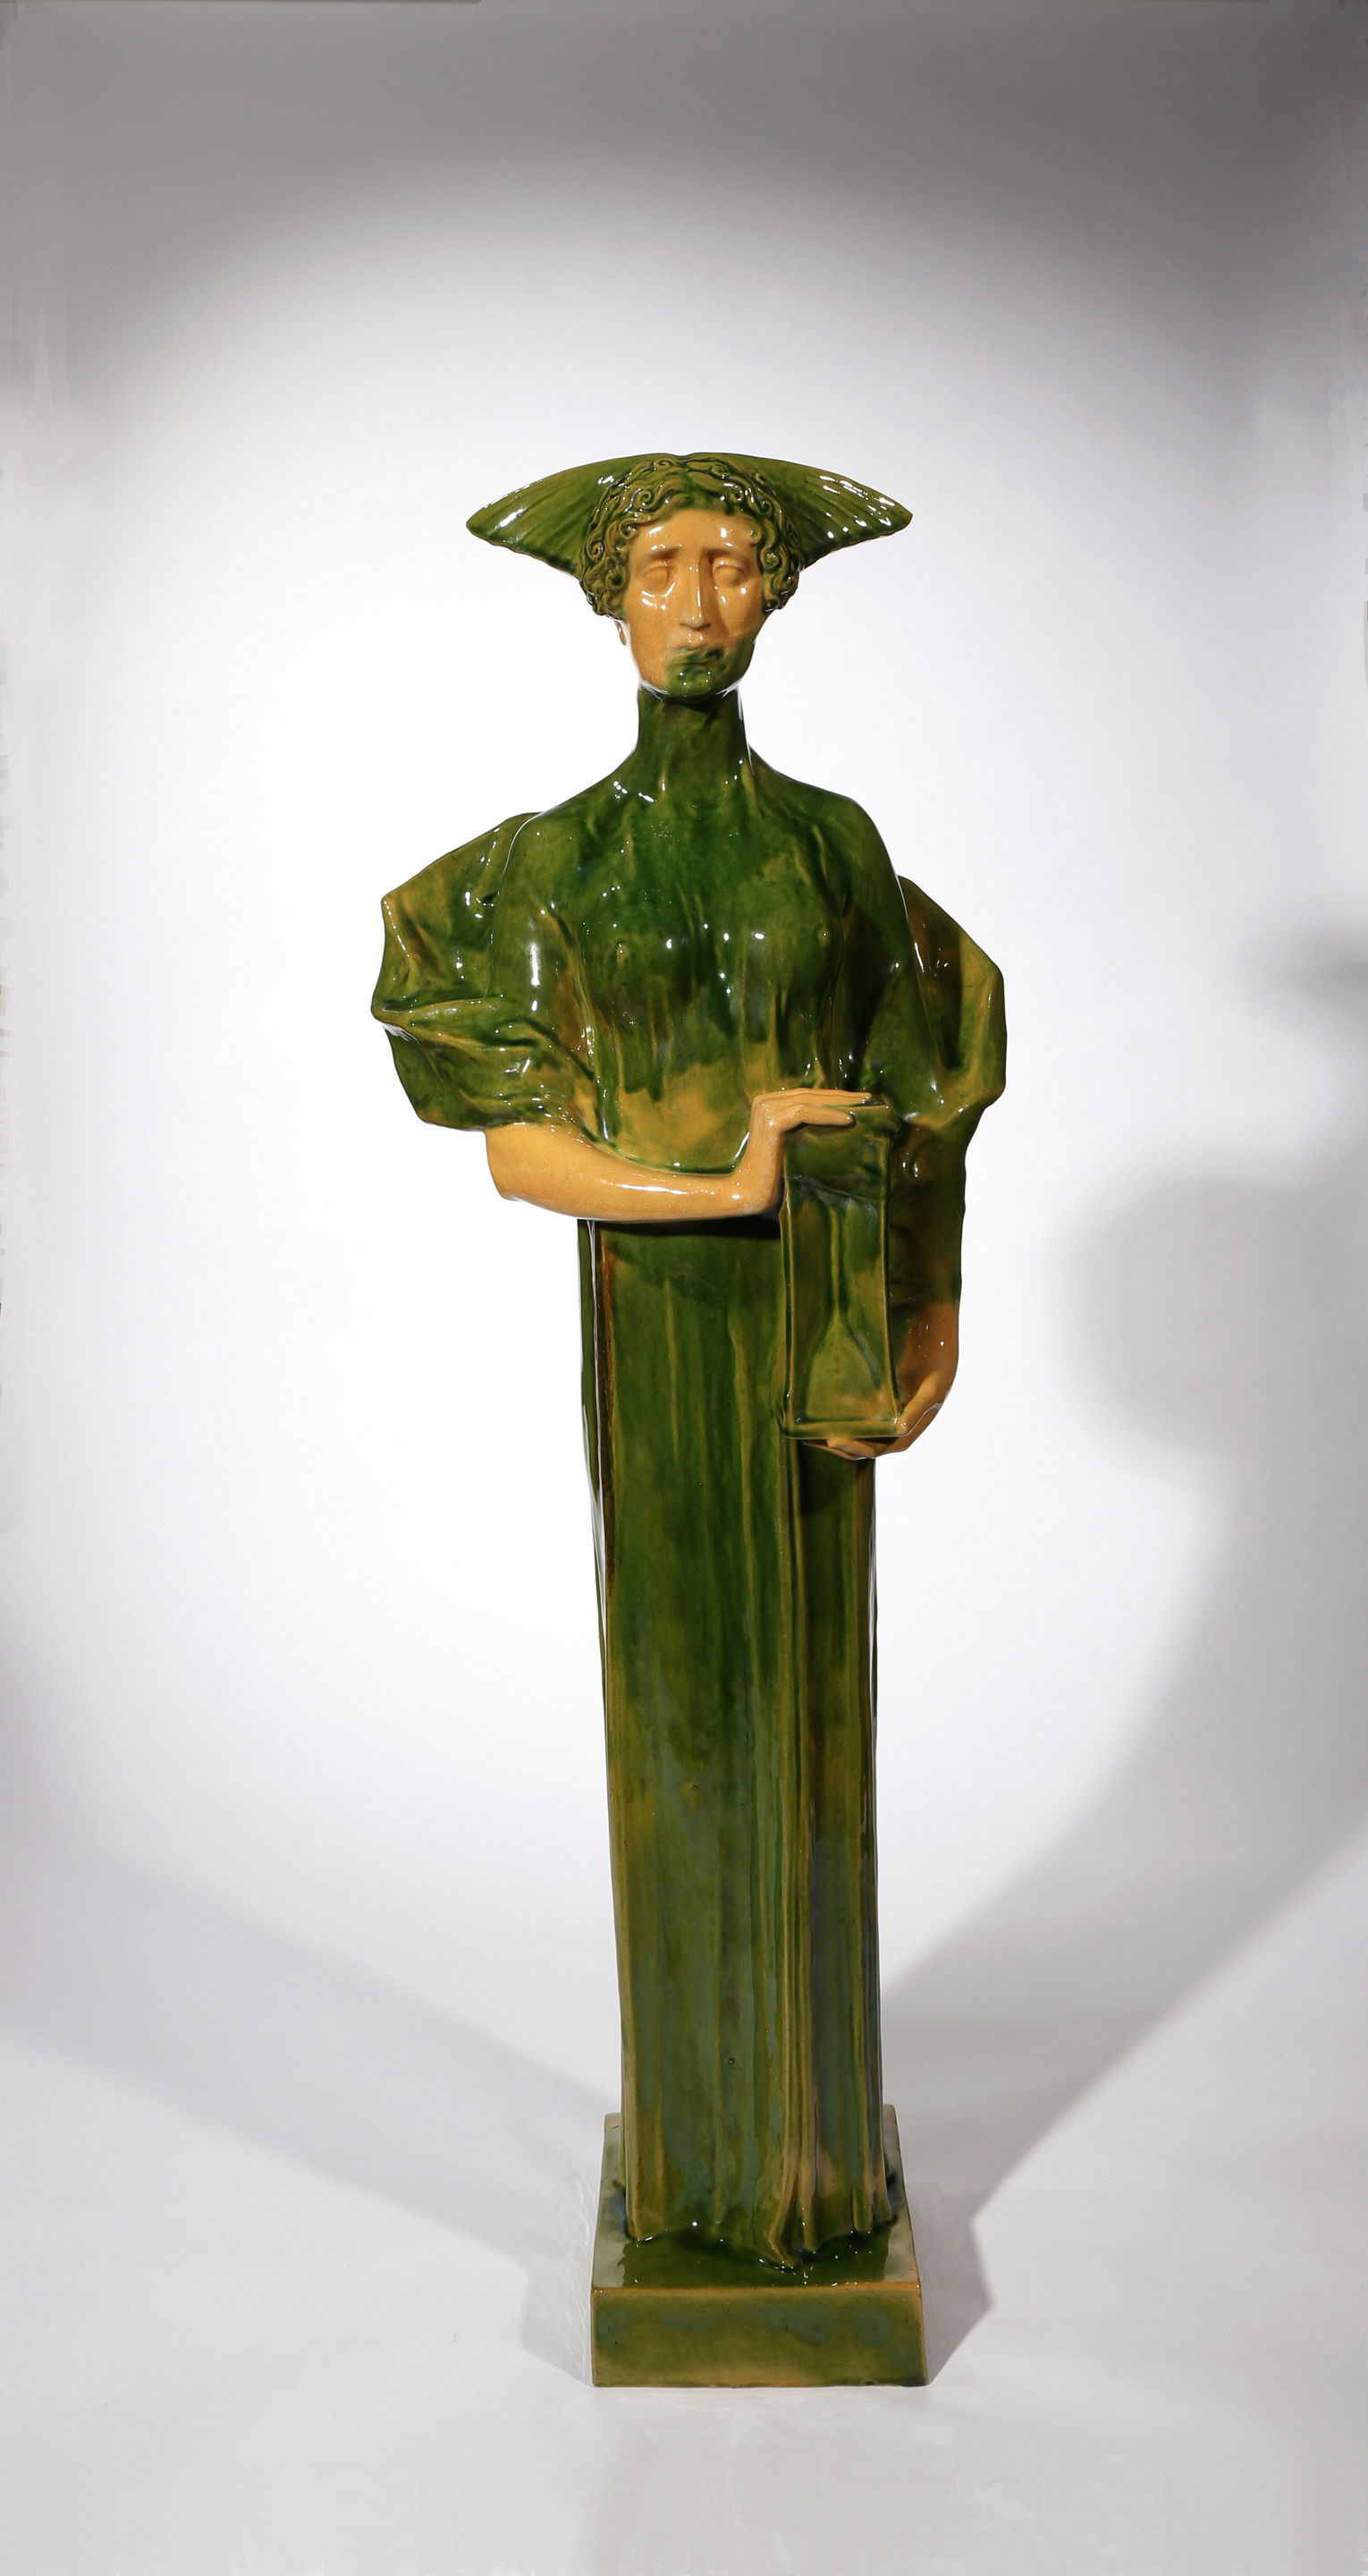 A Large Glazed Pottery Figure of Fate, By Michael Powolny